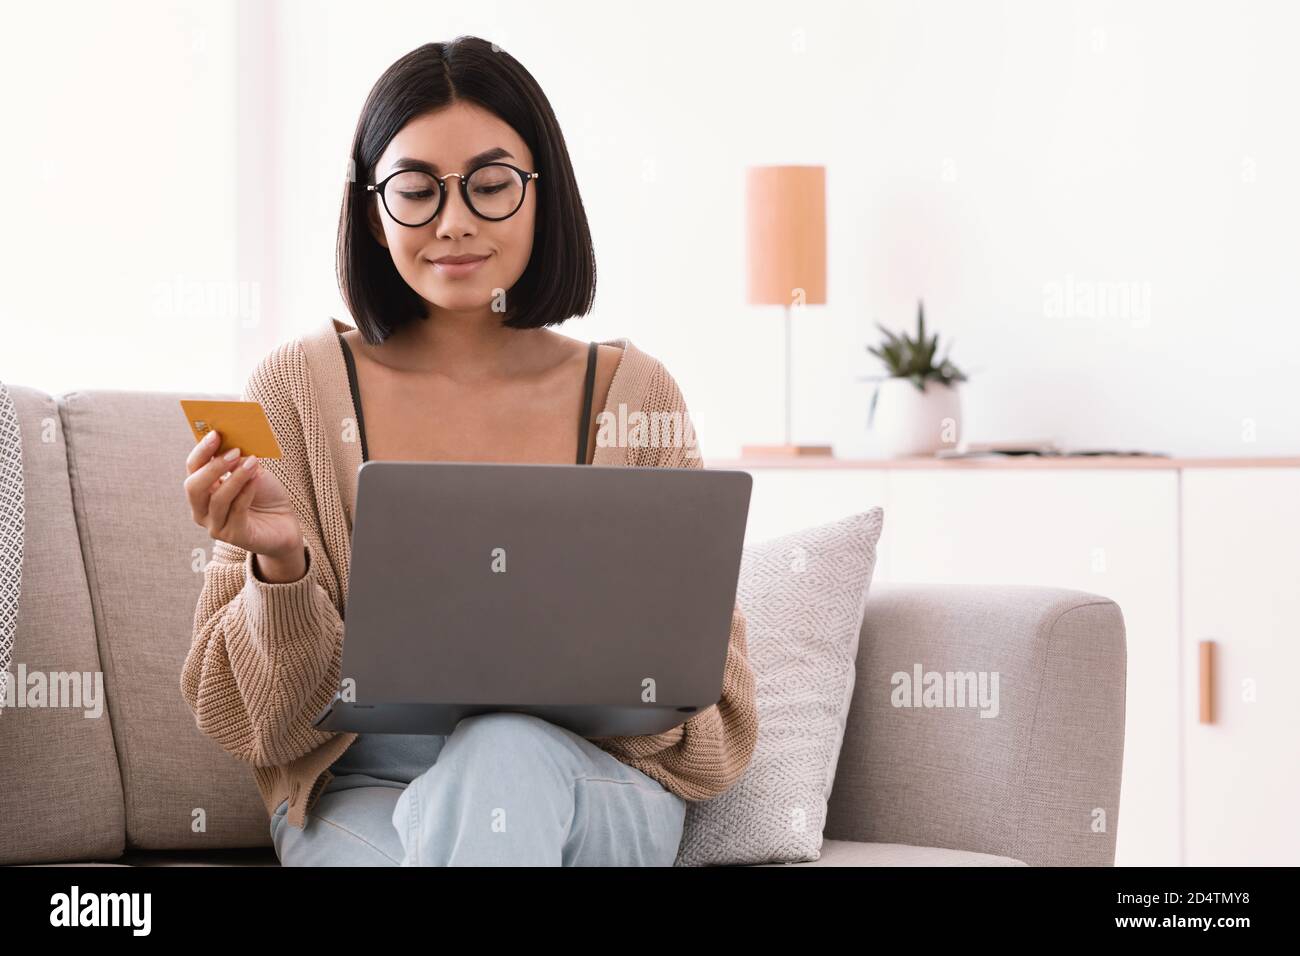 Asian woman making purchases sitting with pc on couch Stock Photo